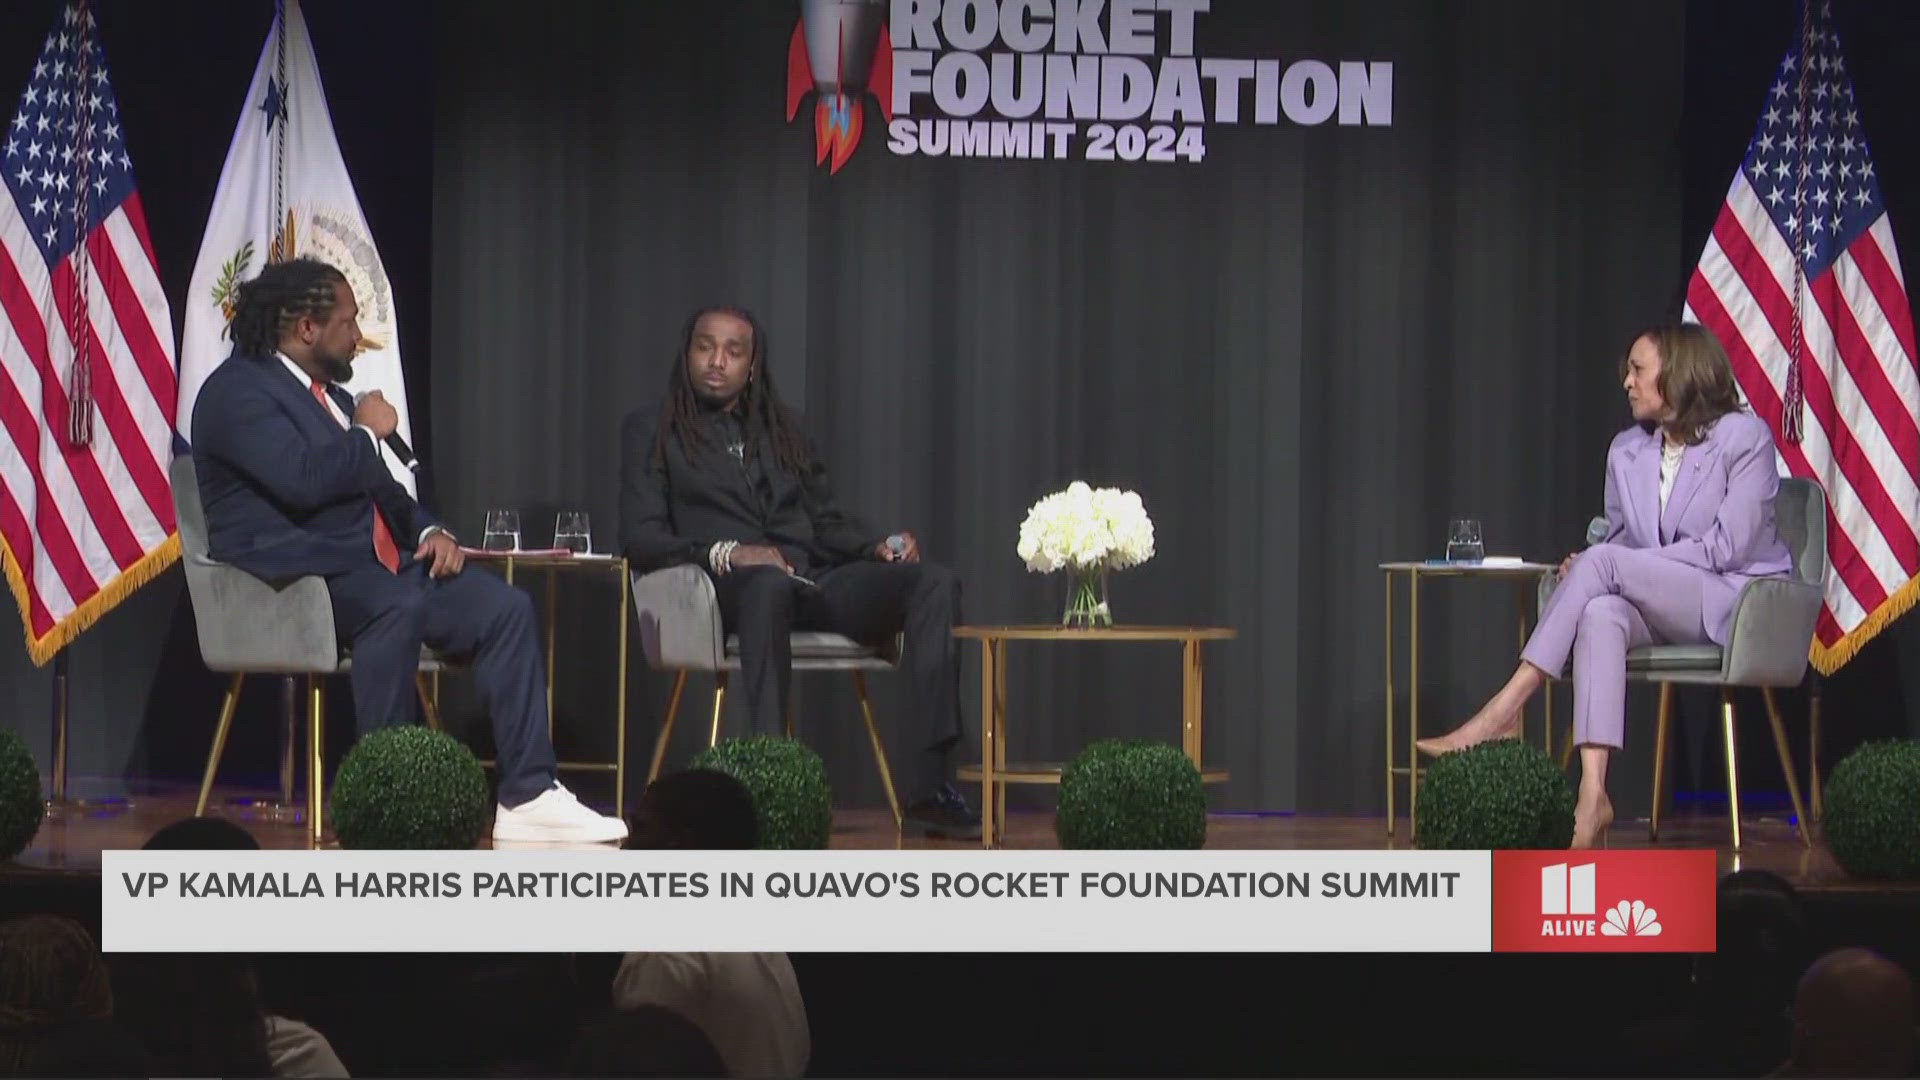 Quavo spoke on why he started the Rocket Foundation, honoring his nephew Takeoff's legacy, and his vision for gun violence prevention.